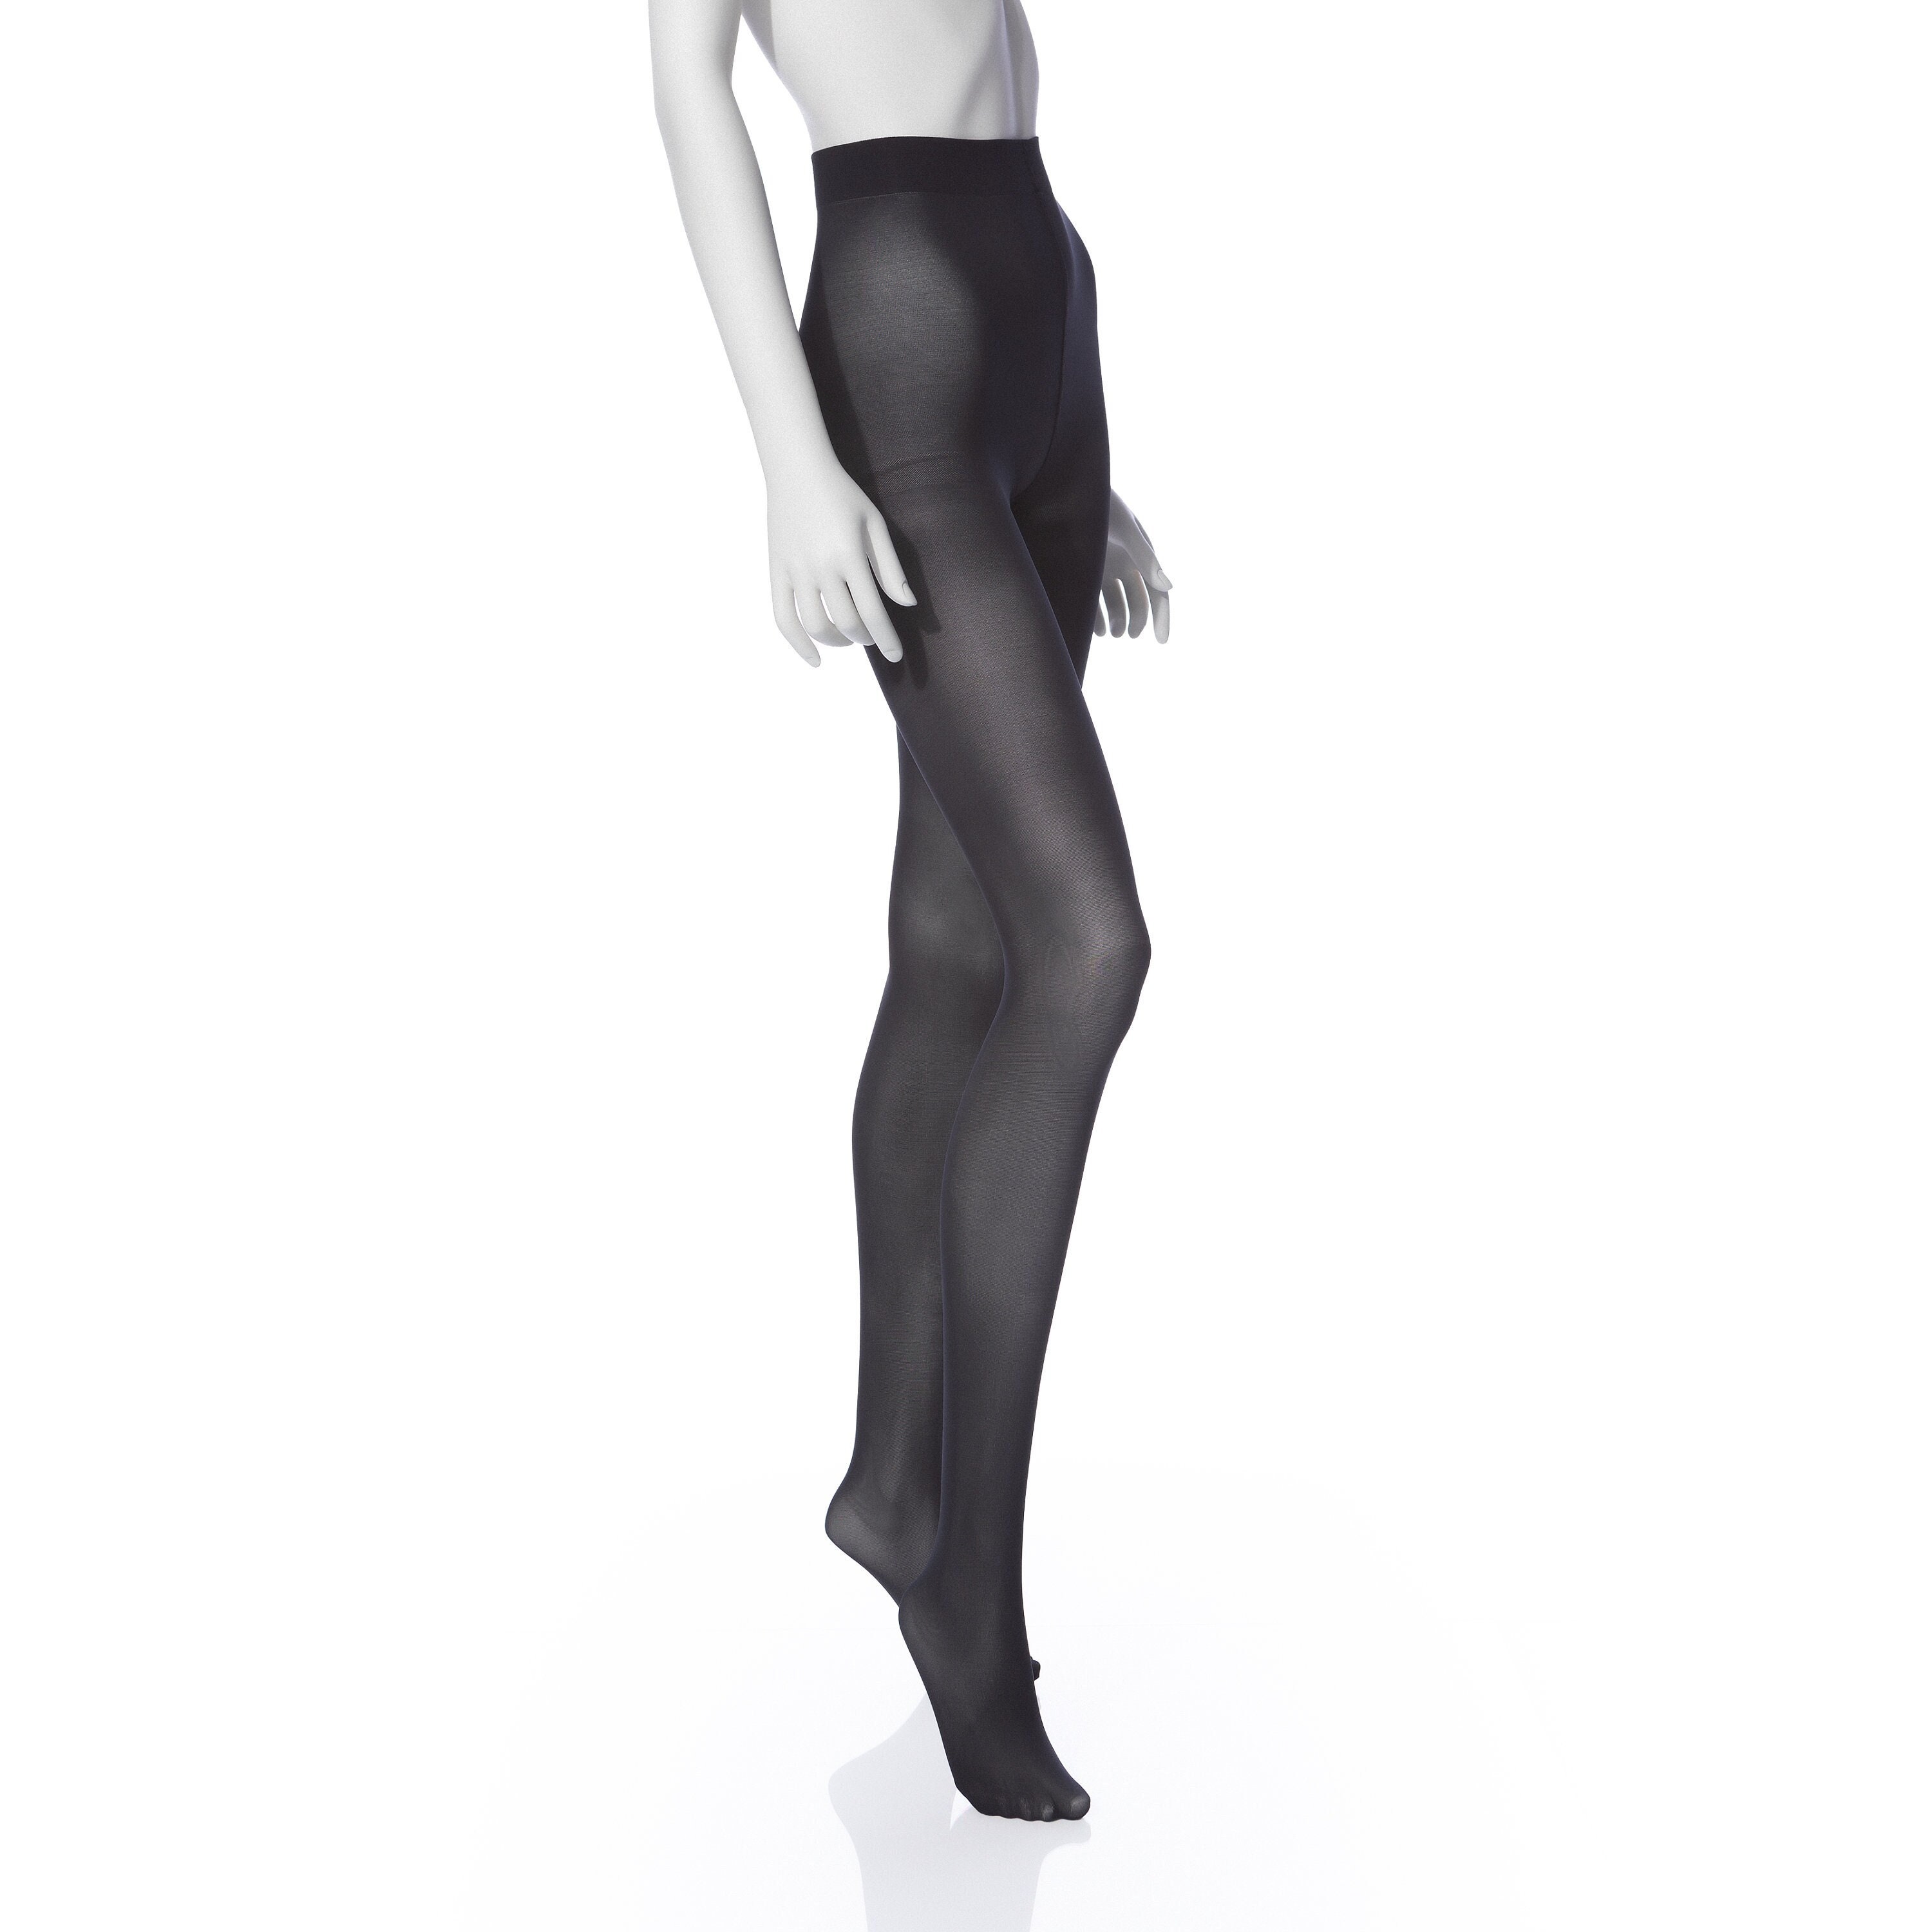 PERFECTLY 30  Collant semi-transparent de Wolford